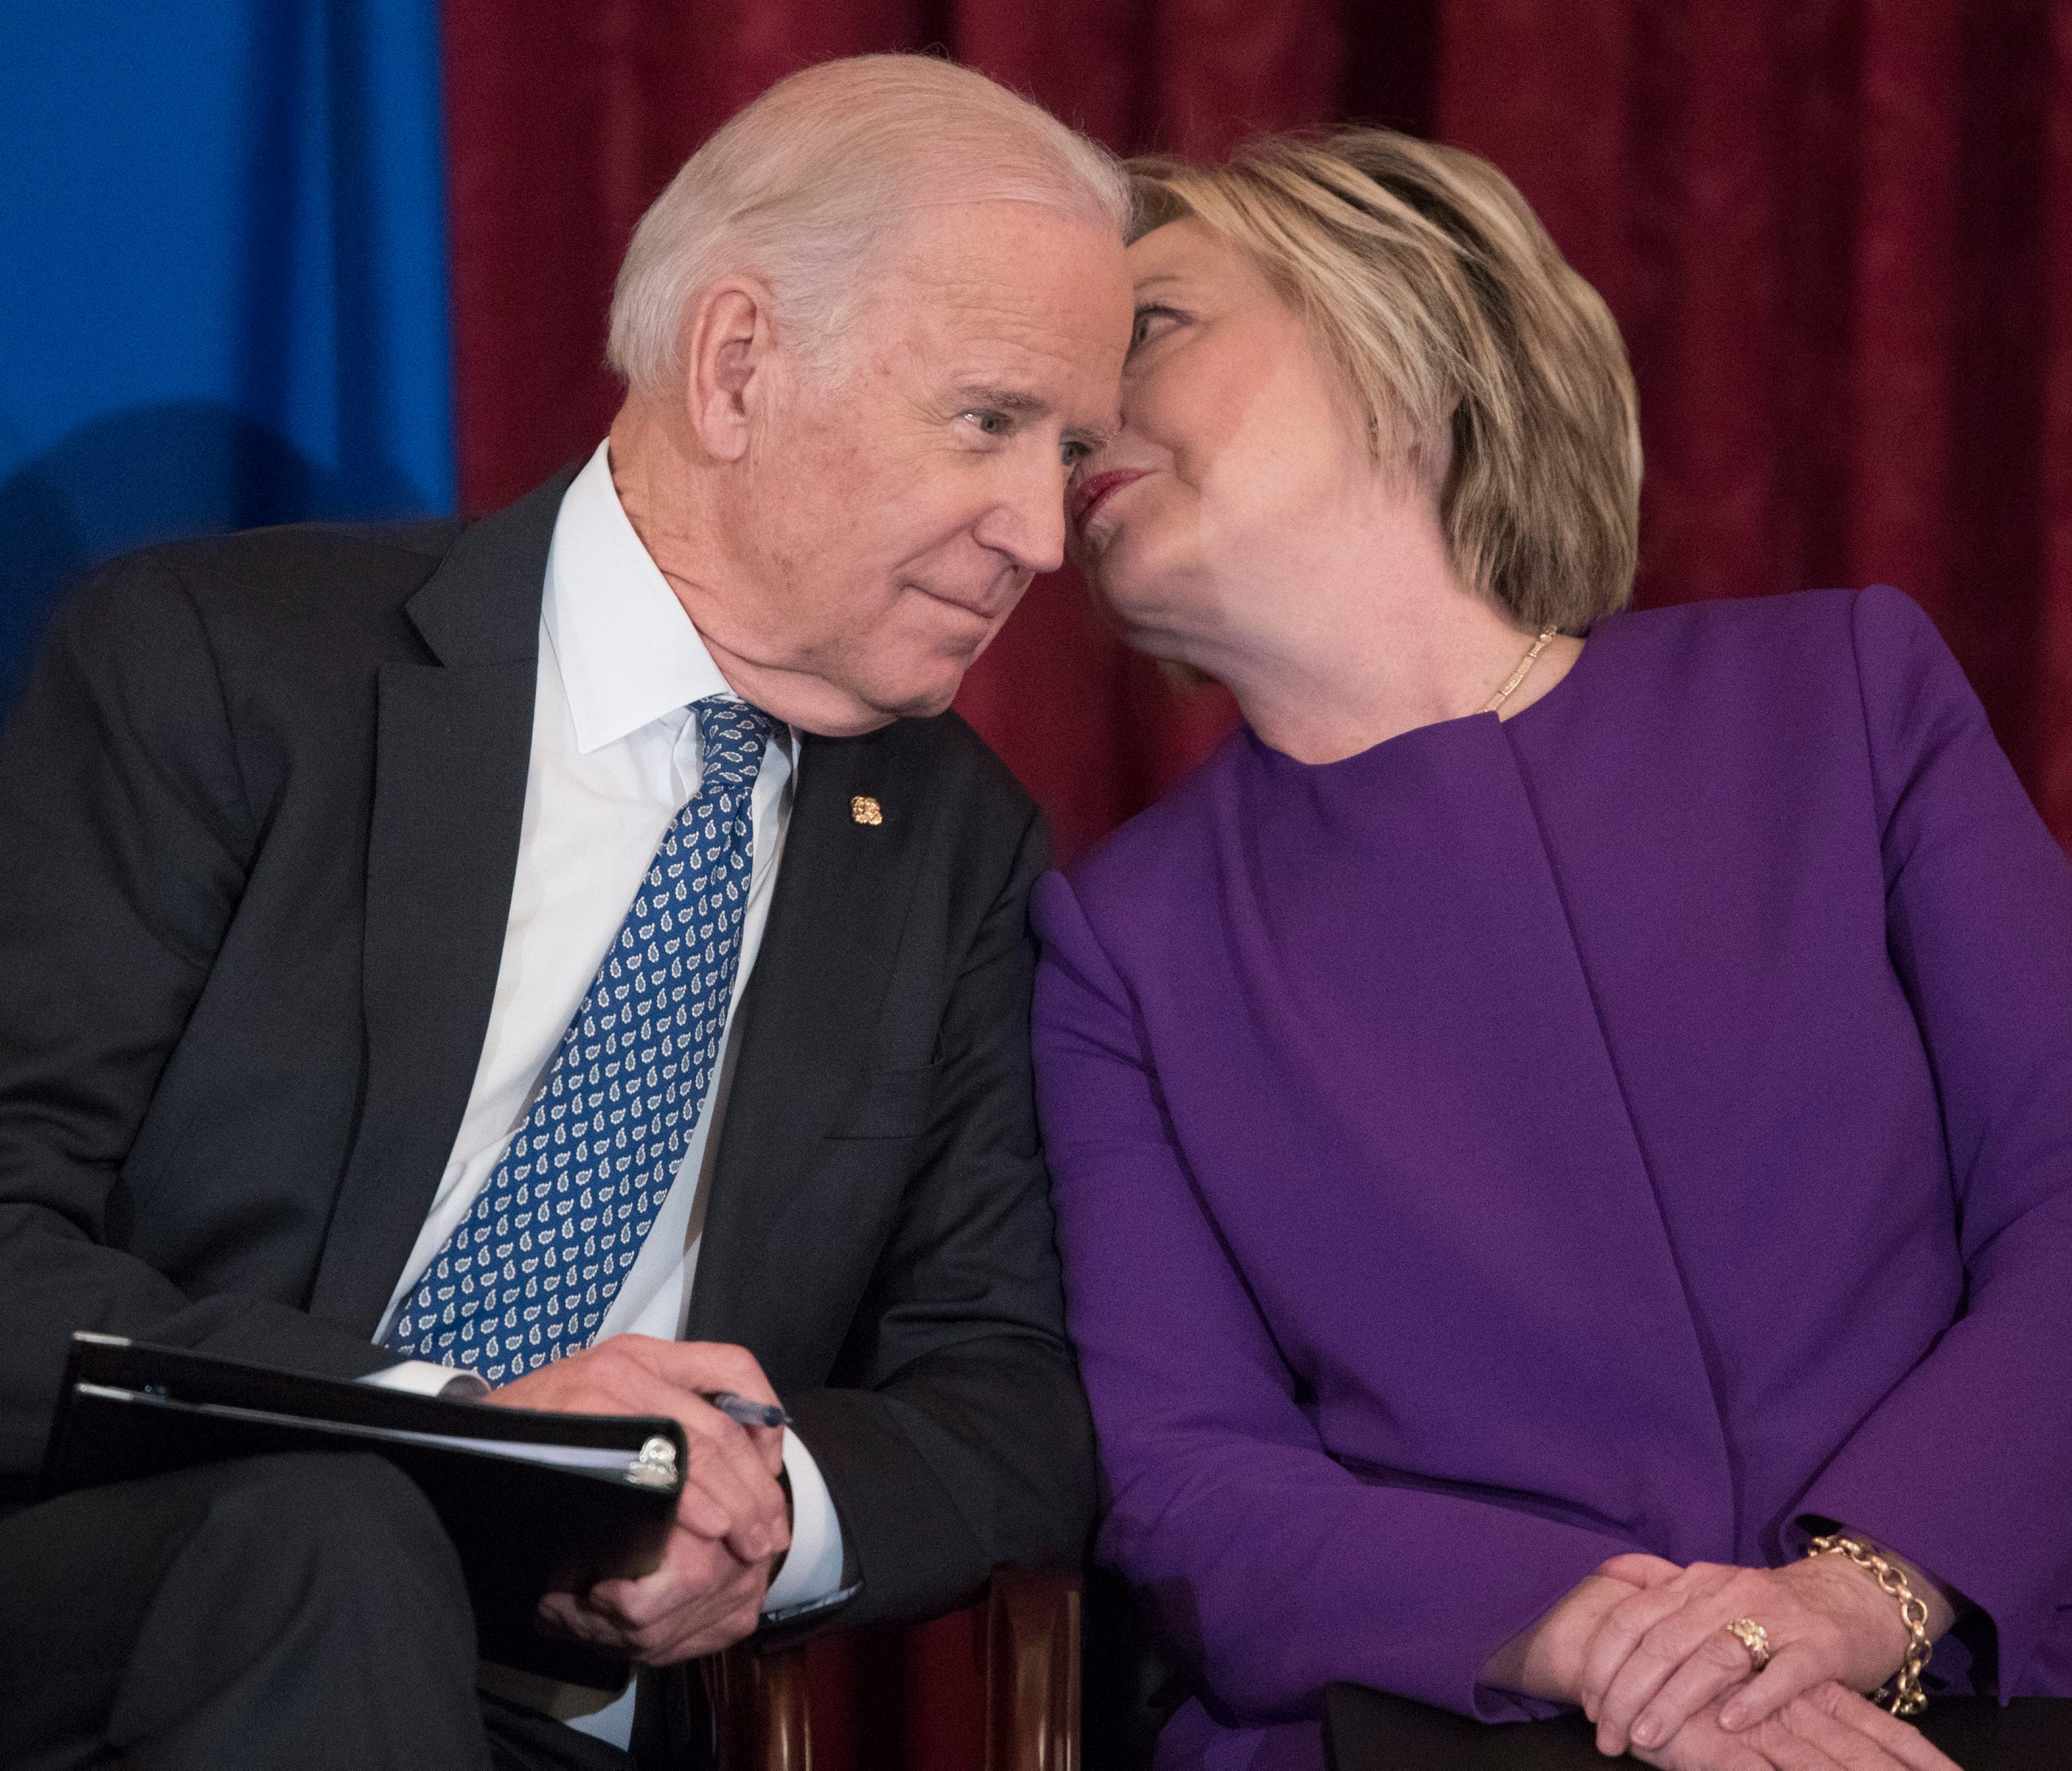 Hillary Clinton and Vice President Biden attend the unveiling of a portrait of Senate Democratic leader Harry Reid on Dec. 8, 2016.